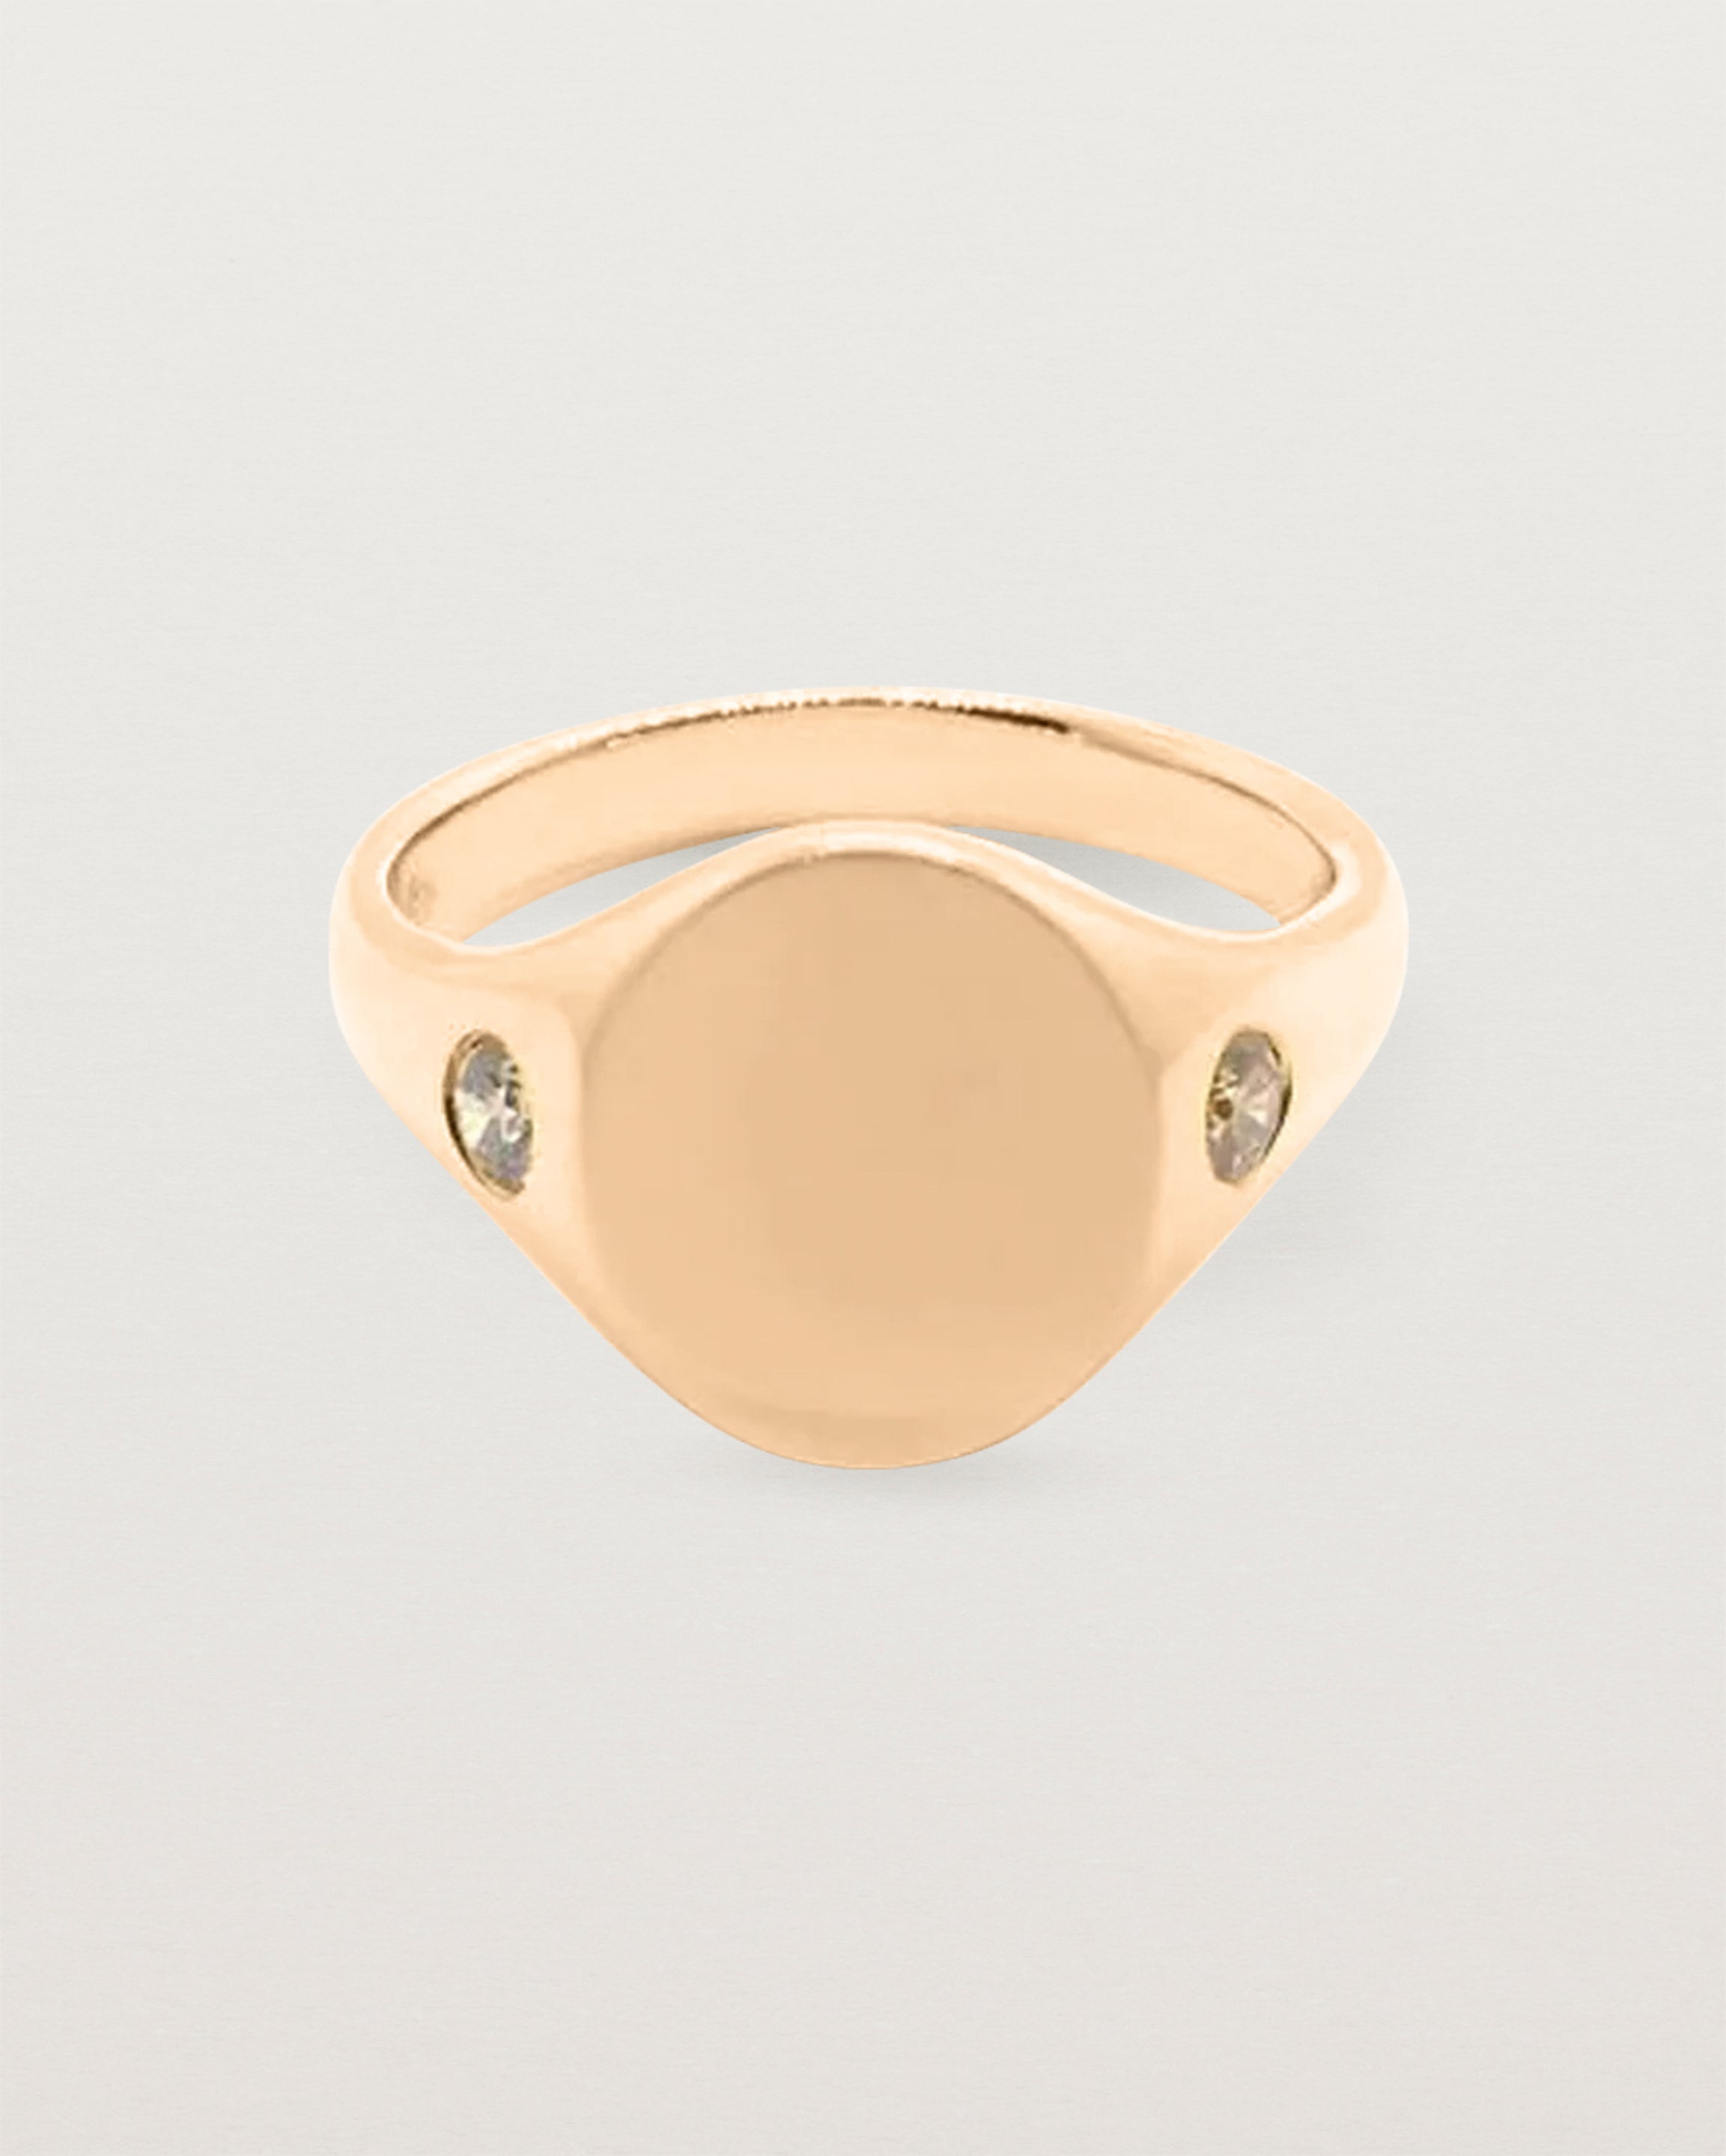 An oval signet with one diamond set on each shoulder in rose gold